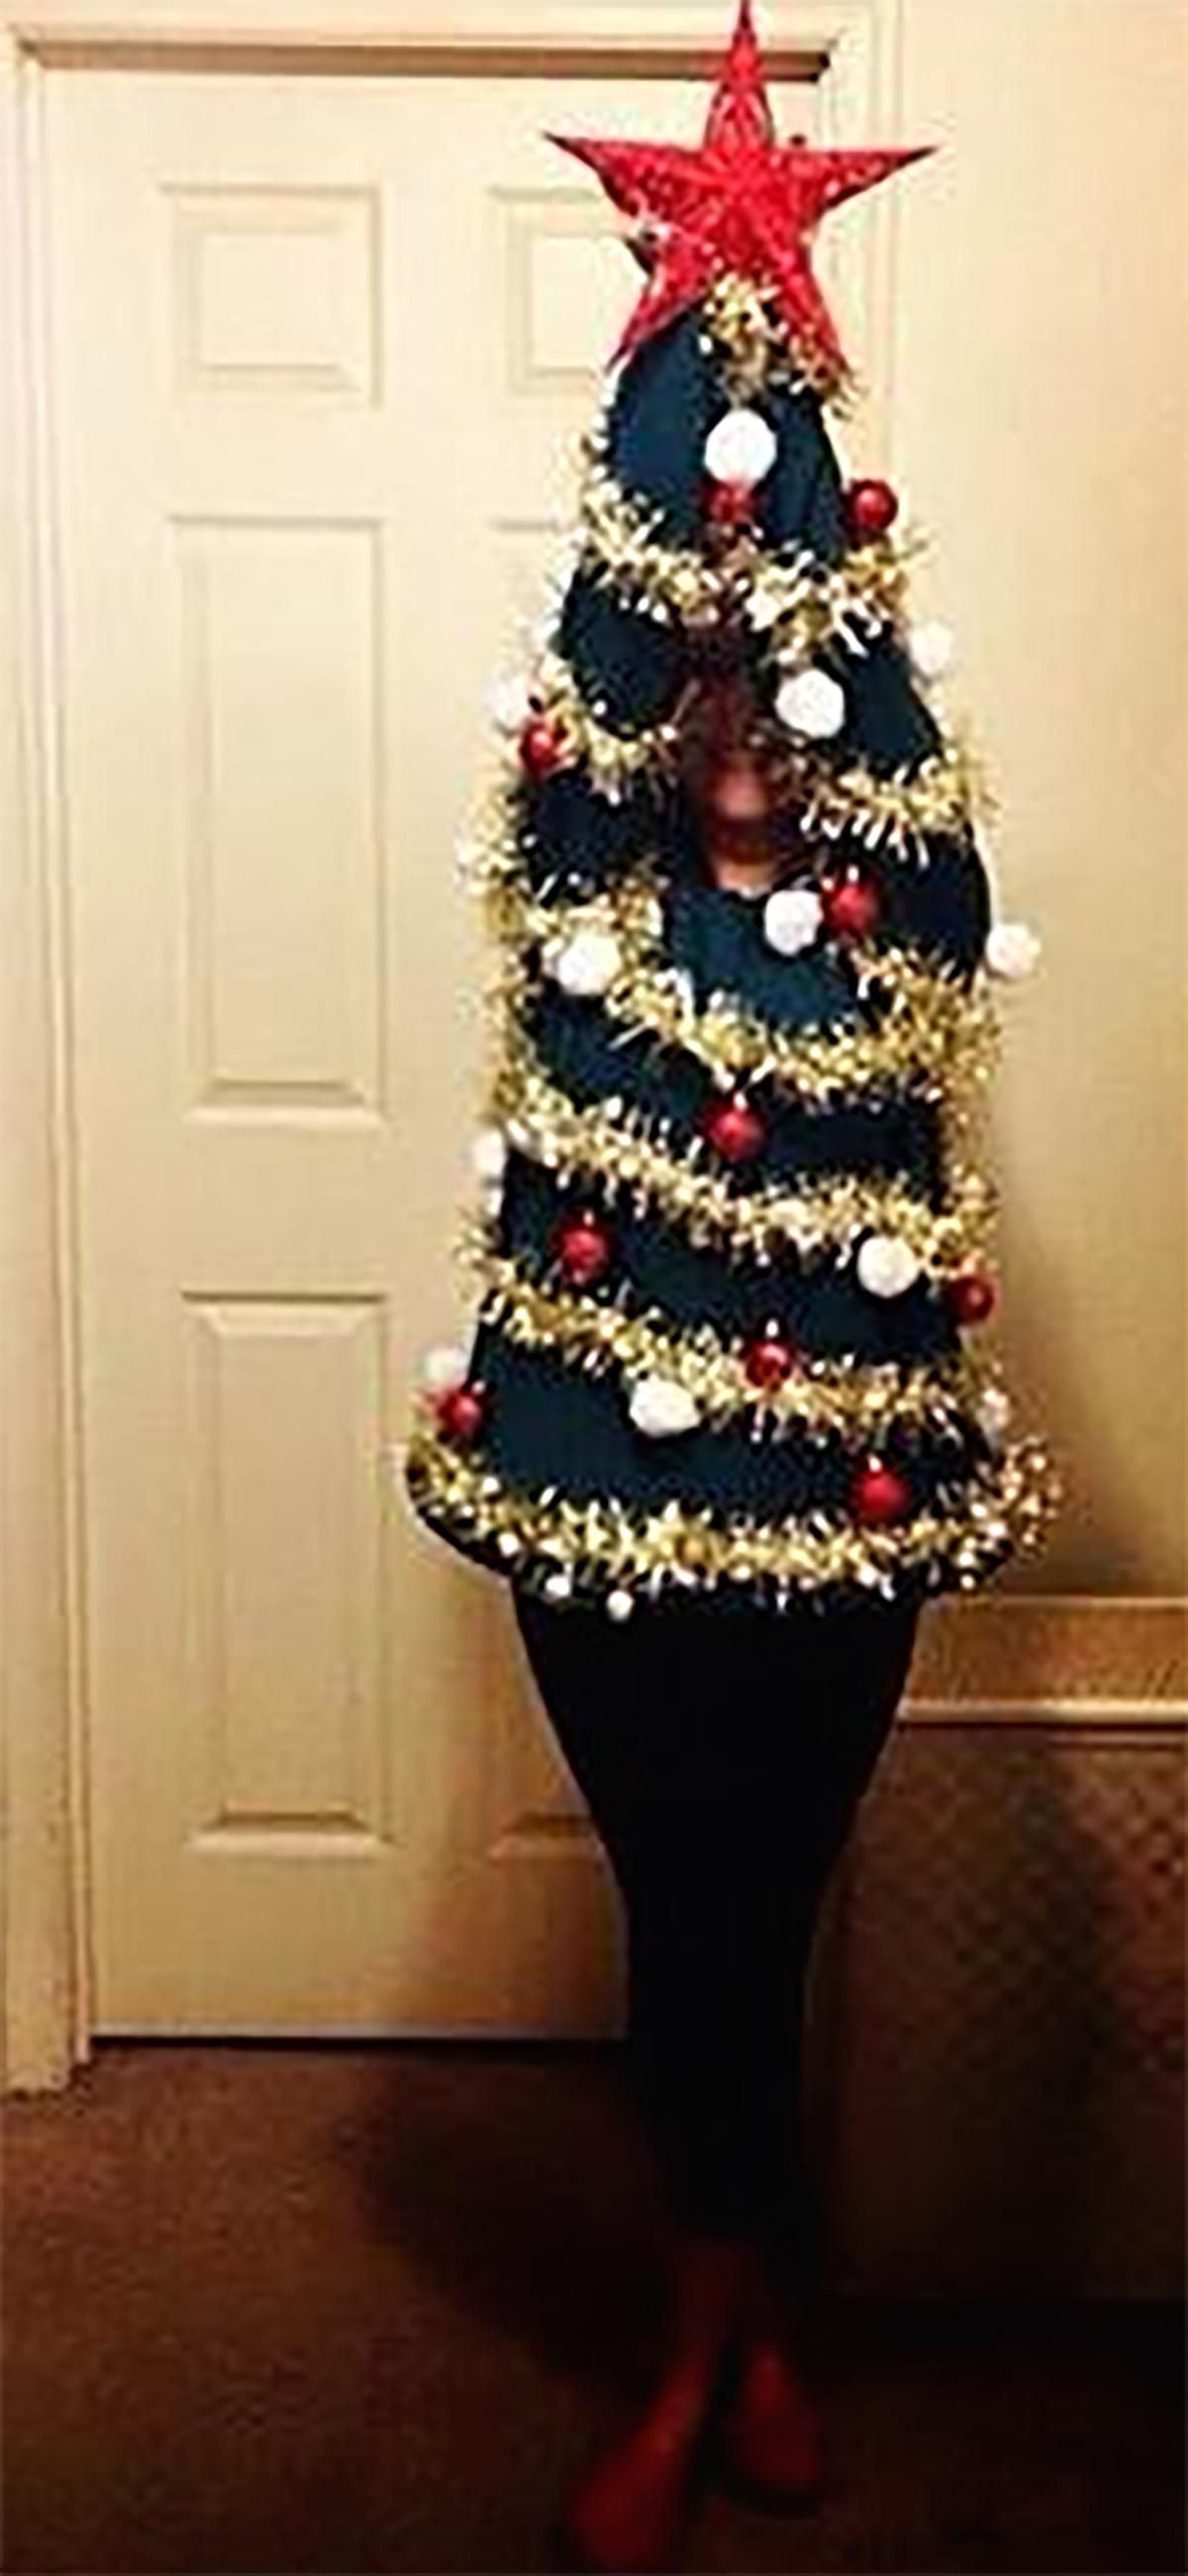 Petra Driscoll, winner of Banana Moon's Christmas jumper competition